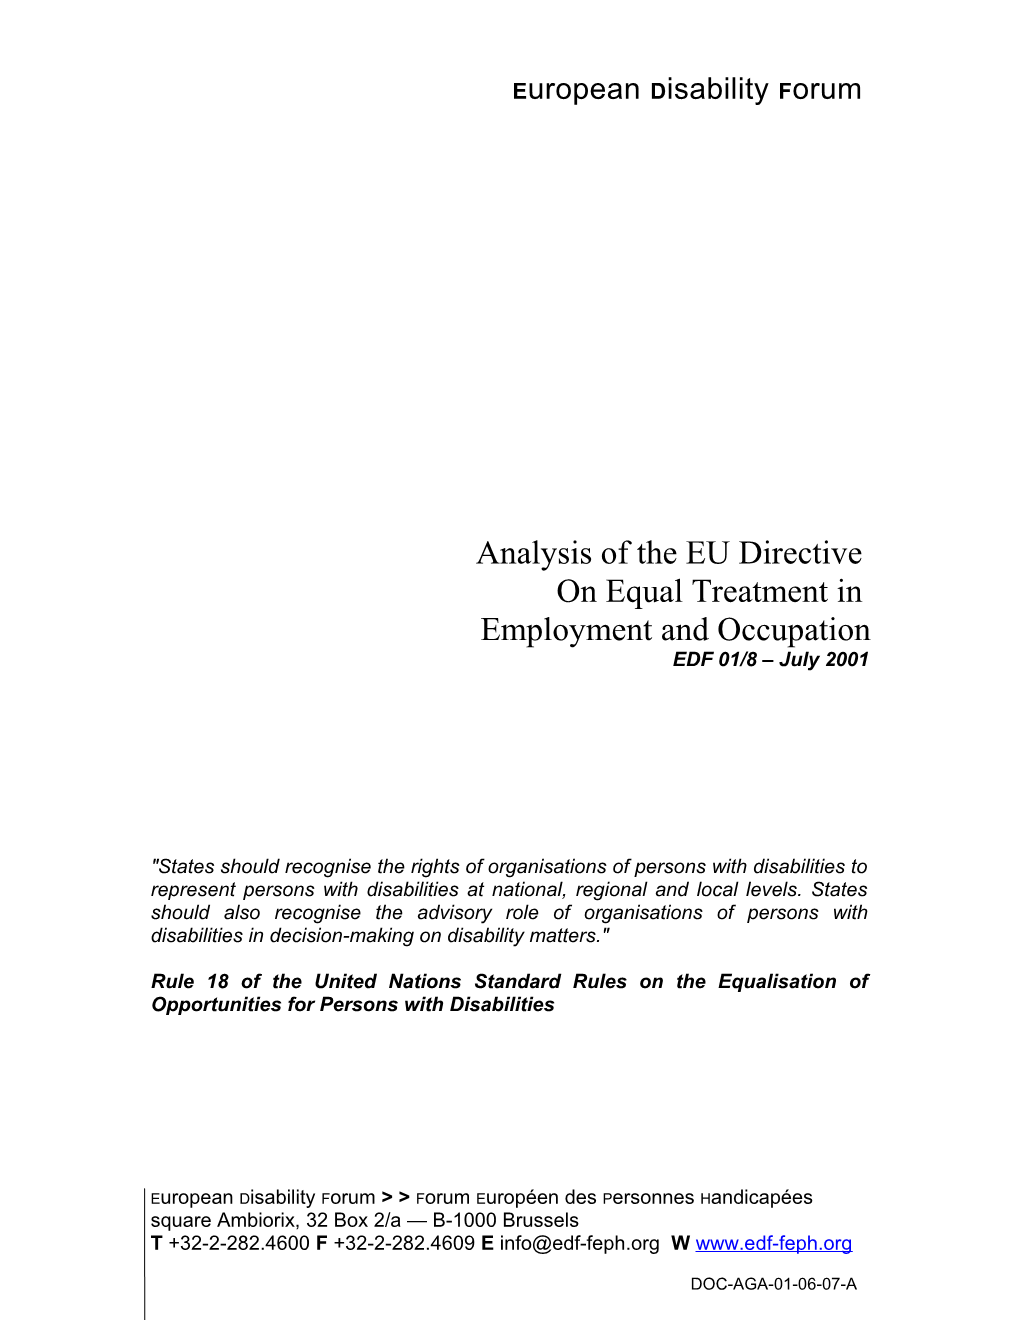 Analysis of the EU Directive on Equal Treatment in Employment and Occupation